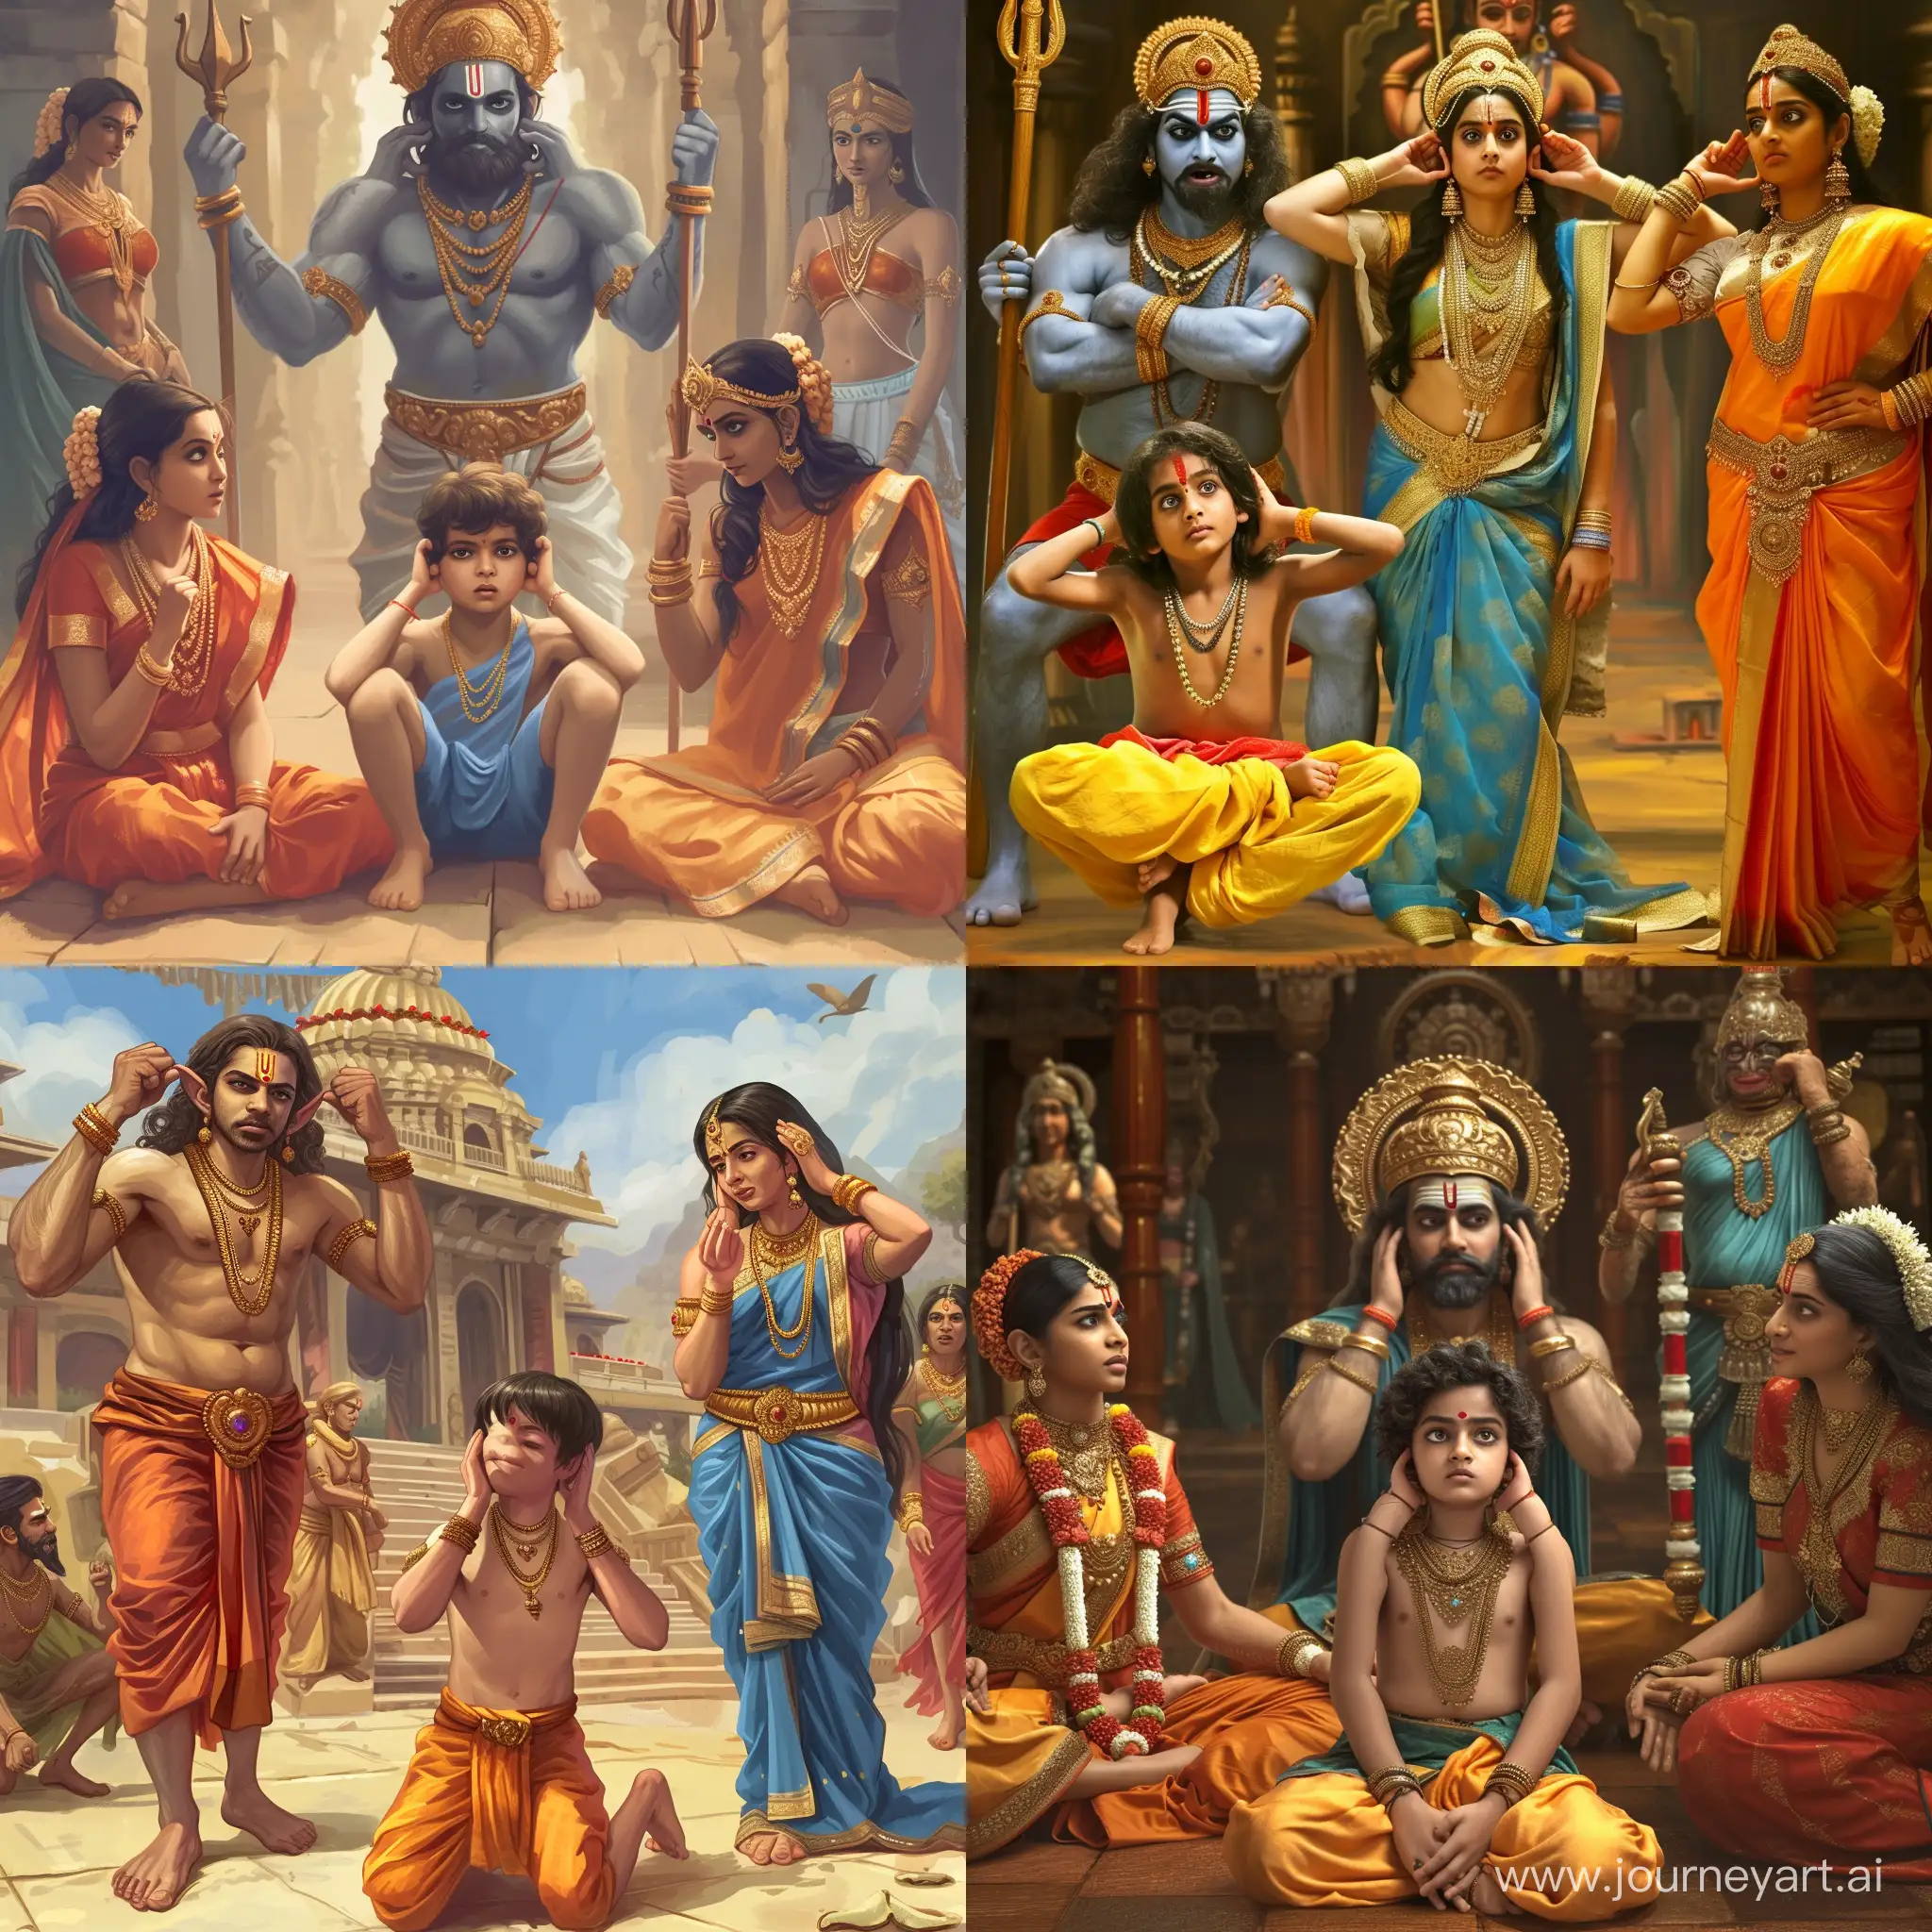 A kid of 8 years old is holding ears, feeling ashamed and doing situps in front of Lord Rama who is exasperated and Goddess Sita who is composed